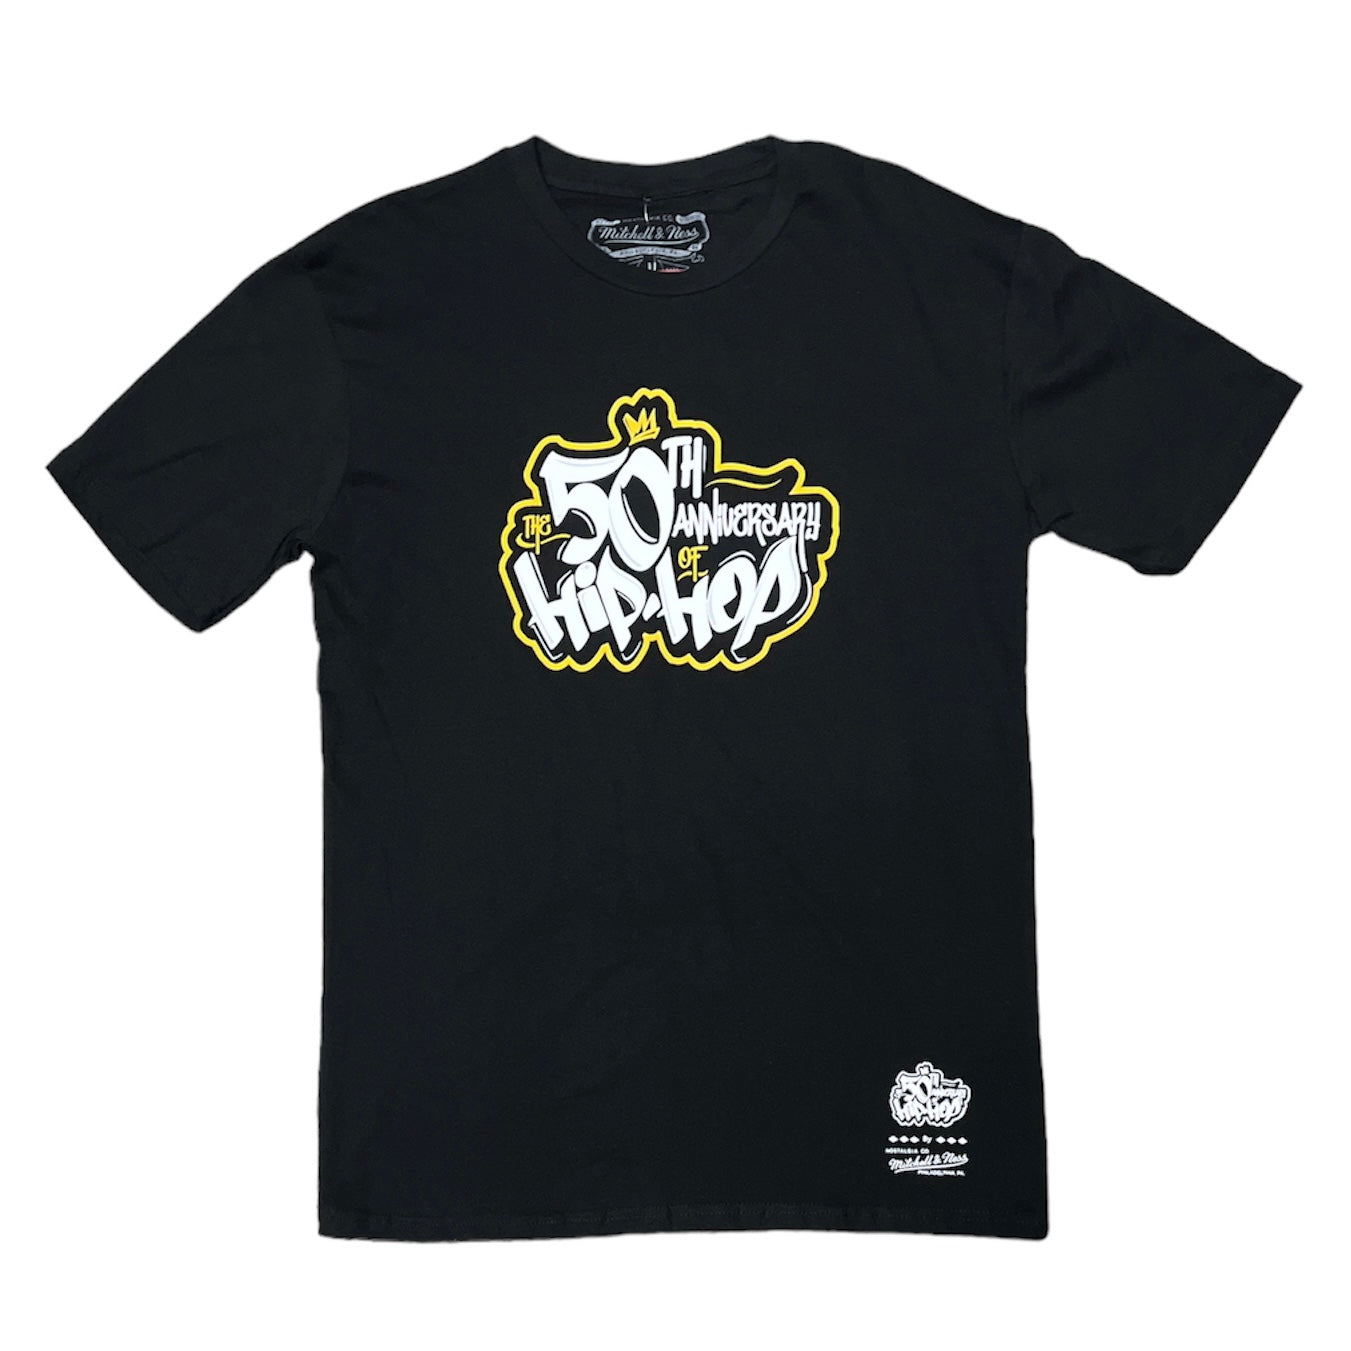 MITCHELL AND NESS - 50TH ANNIVERSARY OF HIP HOP LOGO T-SHIRT